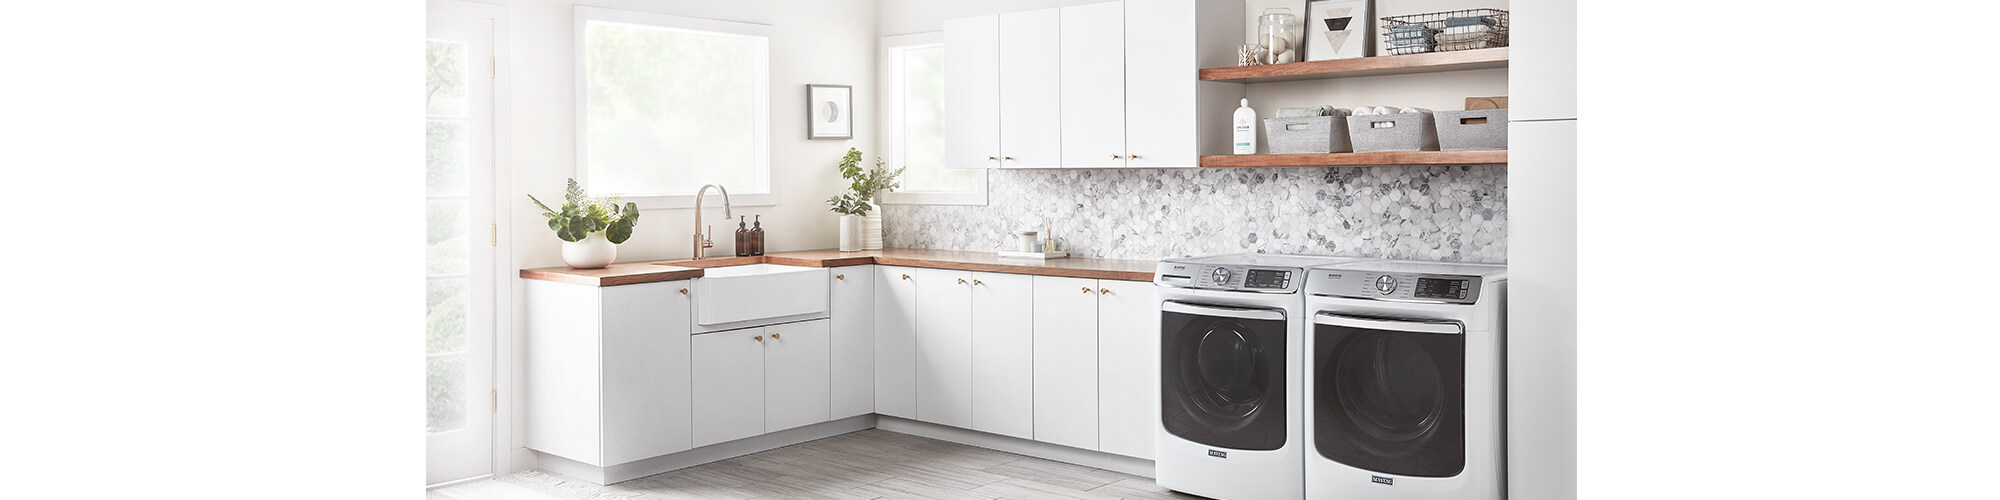 A large laundry room with white cabinets, farmhouse sink, and open shelving with neutral organizational baskets